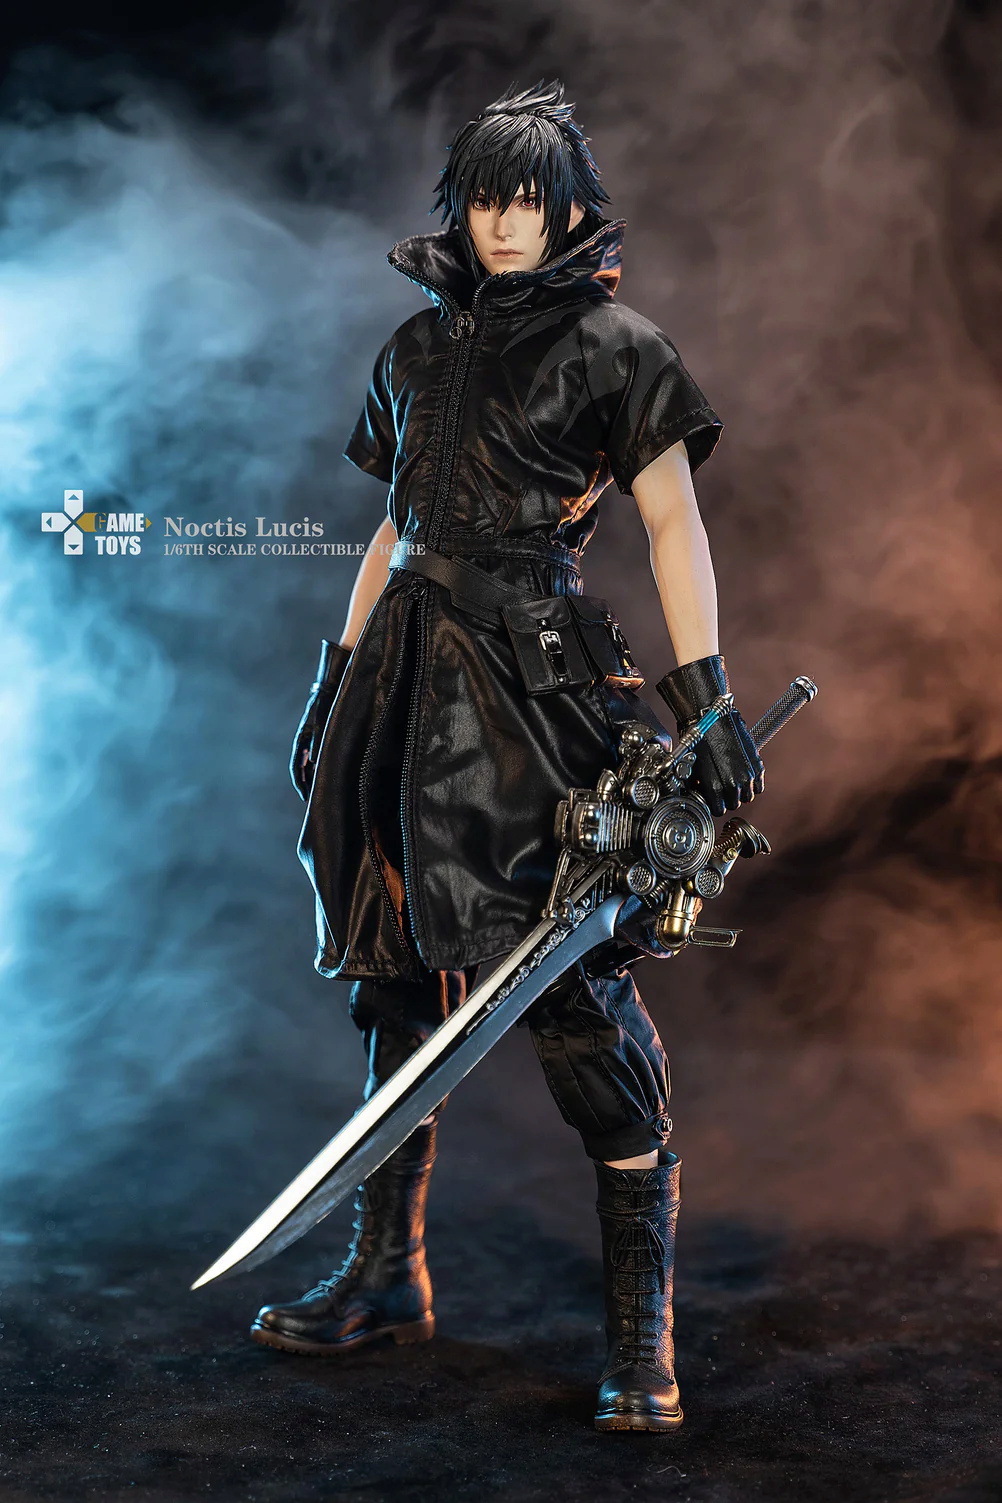 GameToys - NEW PRODUCT: Gametoys Noctis Lucis, additional accessories, and throne 09_web10